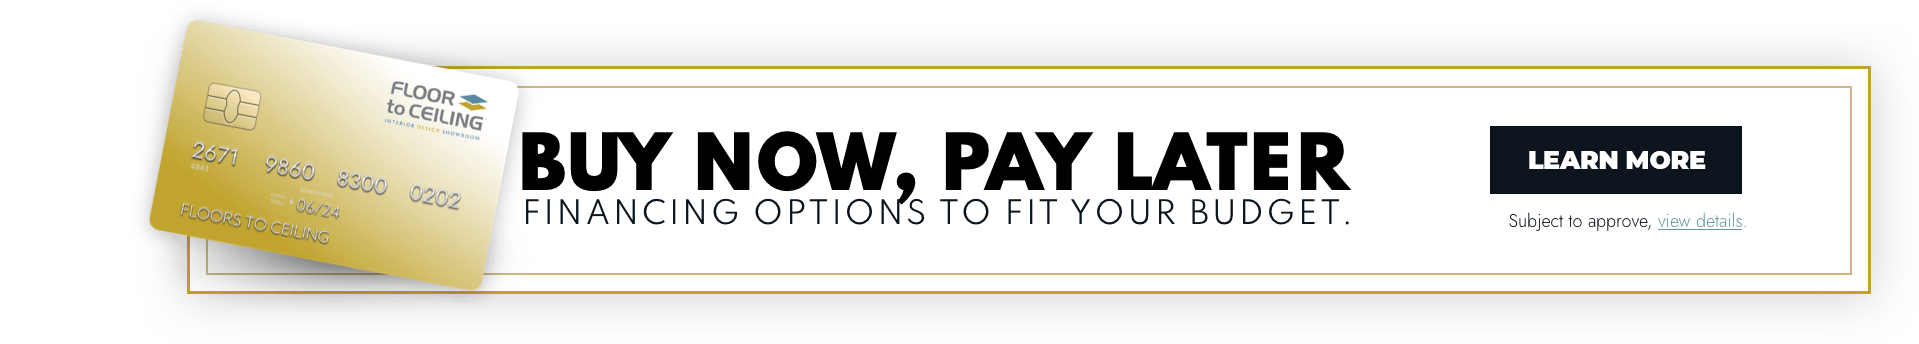 Buy now pay later | Contractors Carpet & Flooring